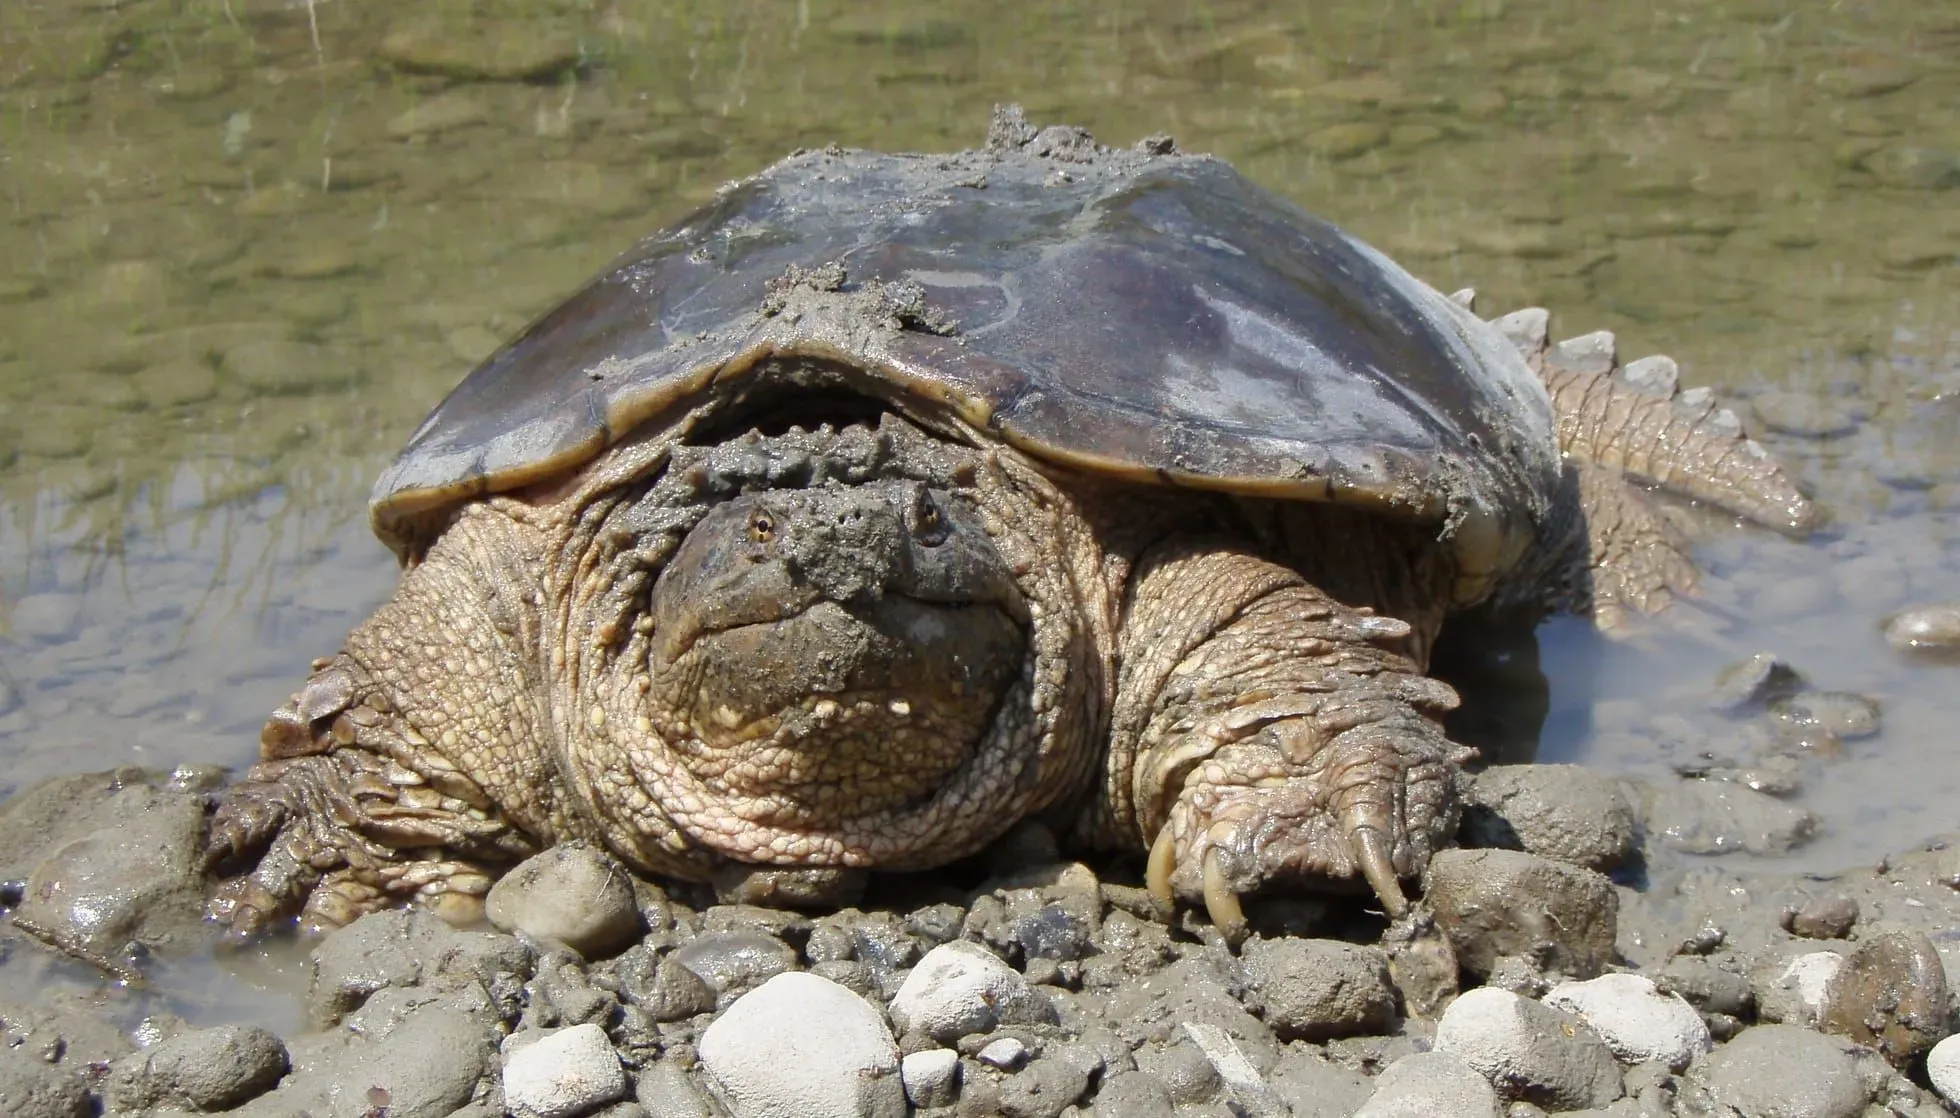  Common Snapping Turtle covered in mud